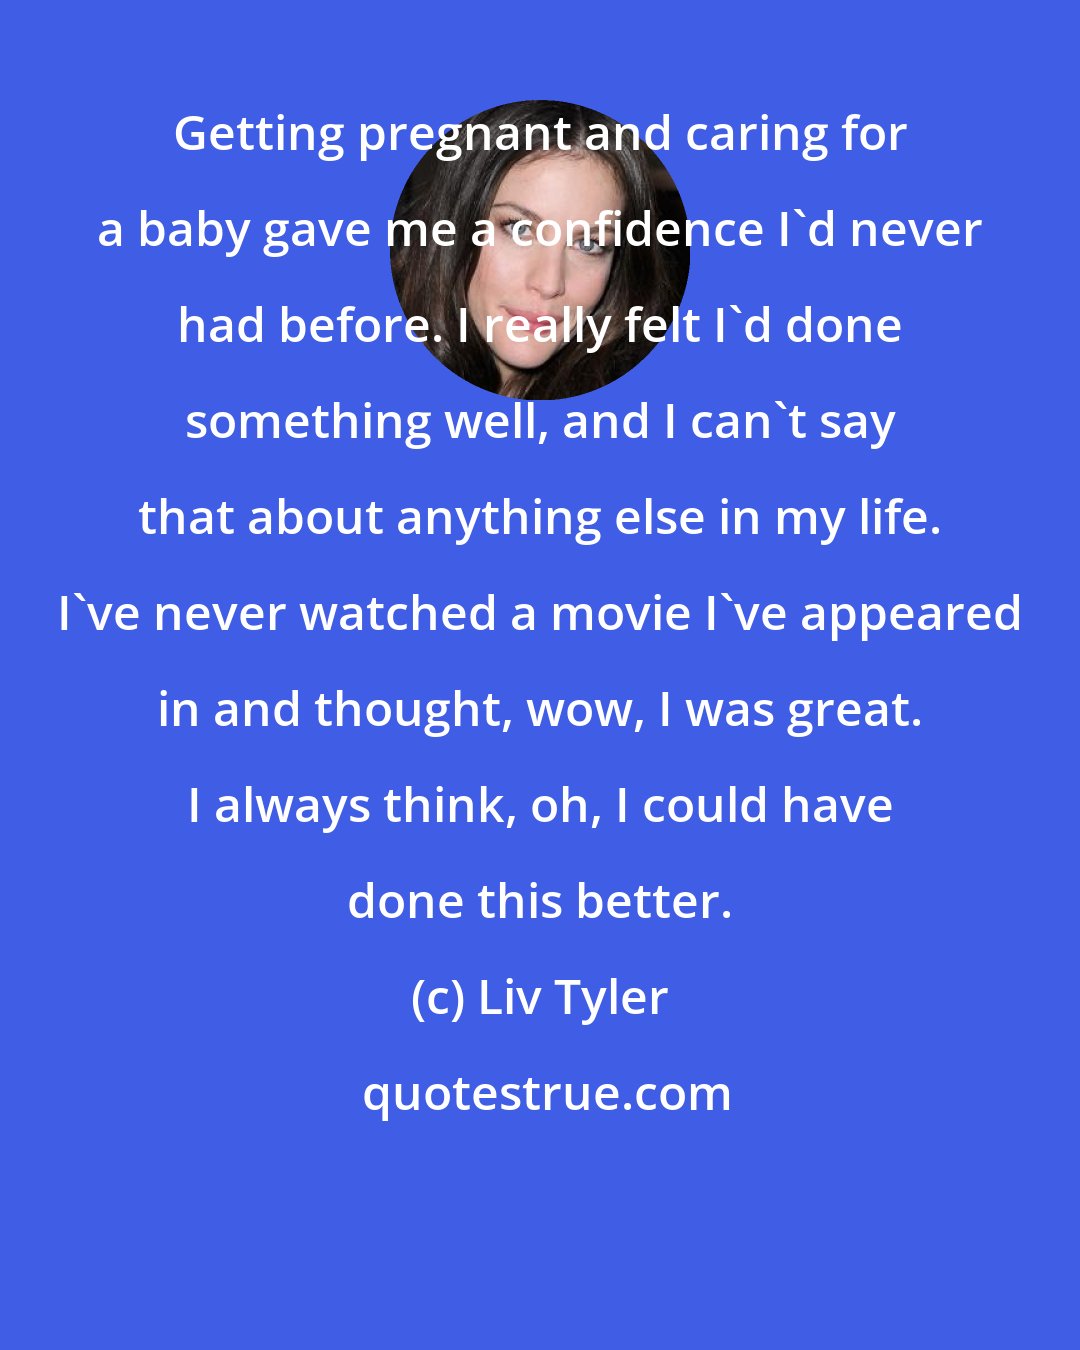 Liv Tyler: Getting pregnant and caring for a baby gave me a confidence I'd never had before. I really felt I'd done something well, and I can't say that about anything else in my life. I've never watched a movie I've appeared in and thought, wow, I was great. I always think, oh, I could have done this better.